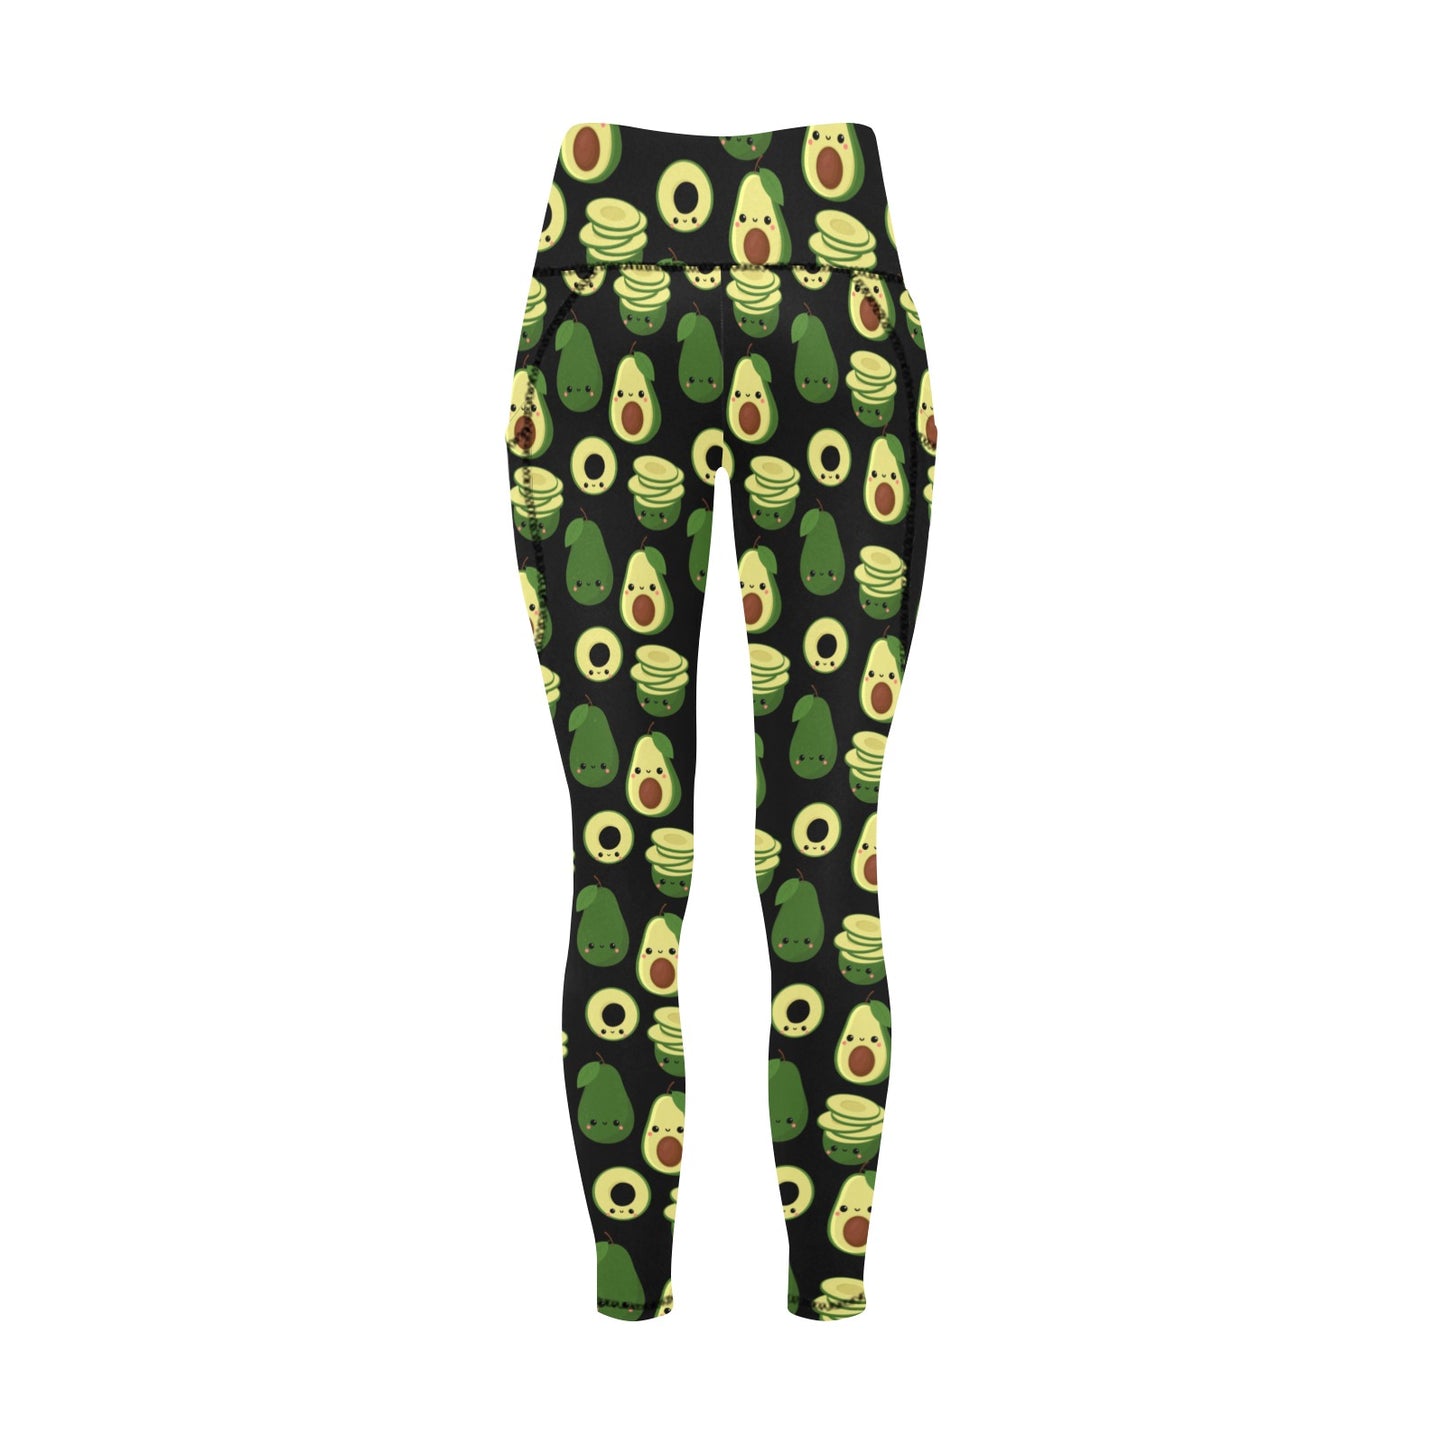 Cute Avocados - Women's Leggings with Pockets Women's Leggings with Pockets S - 2XL Food